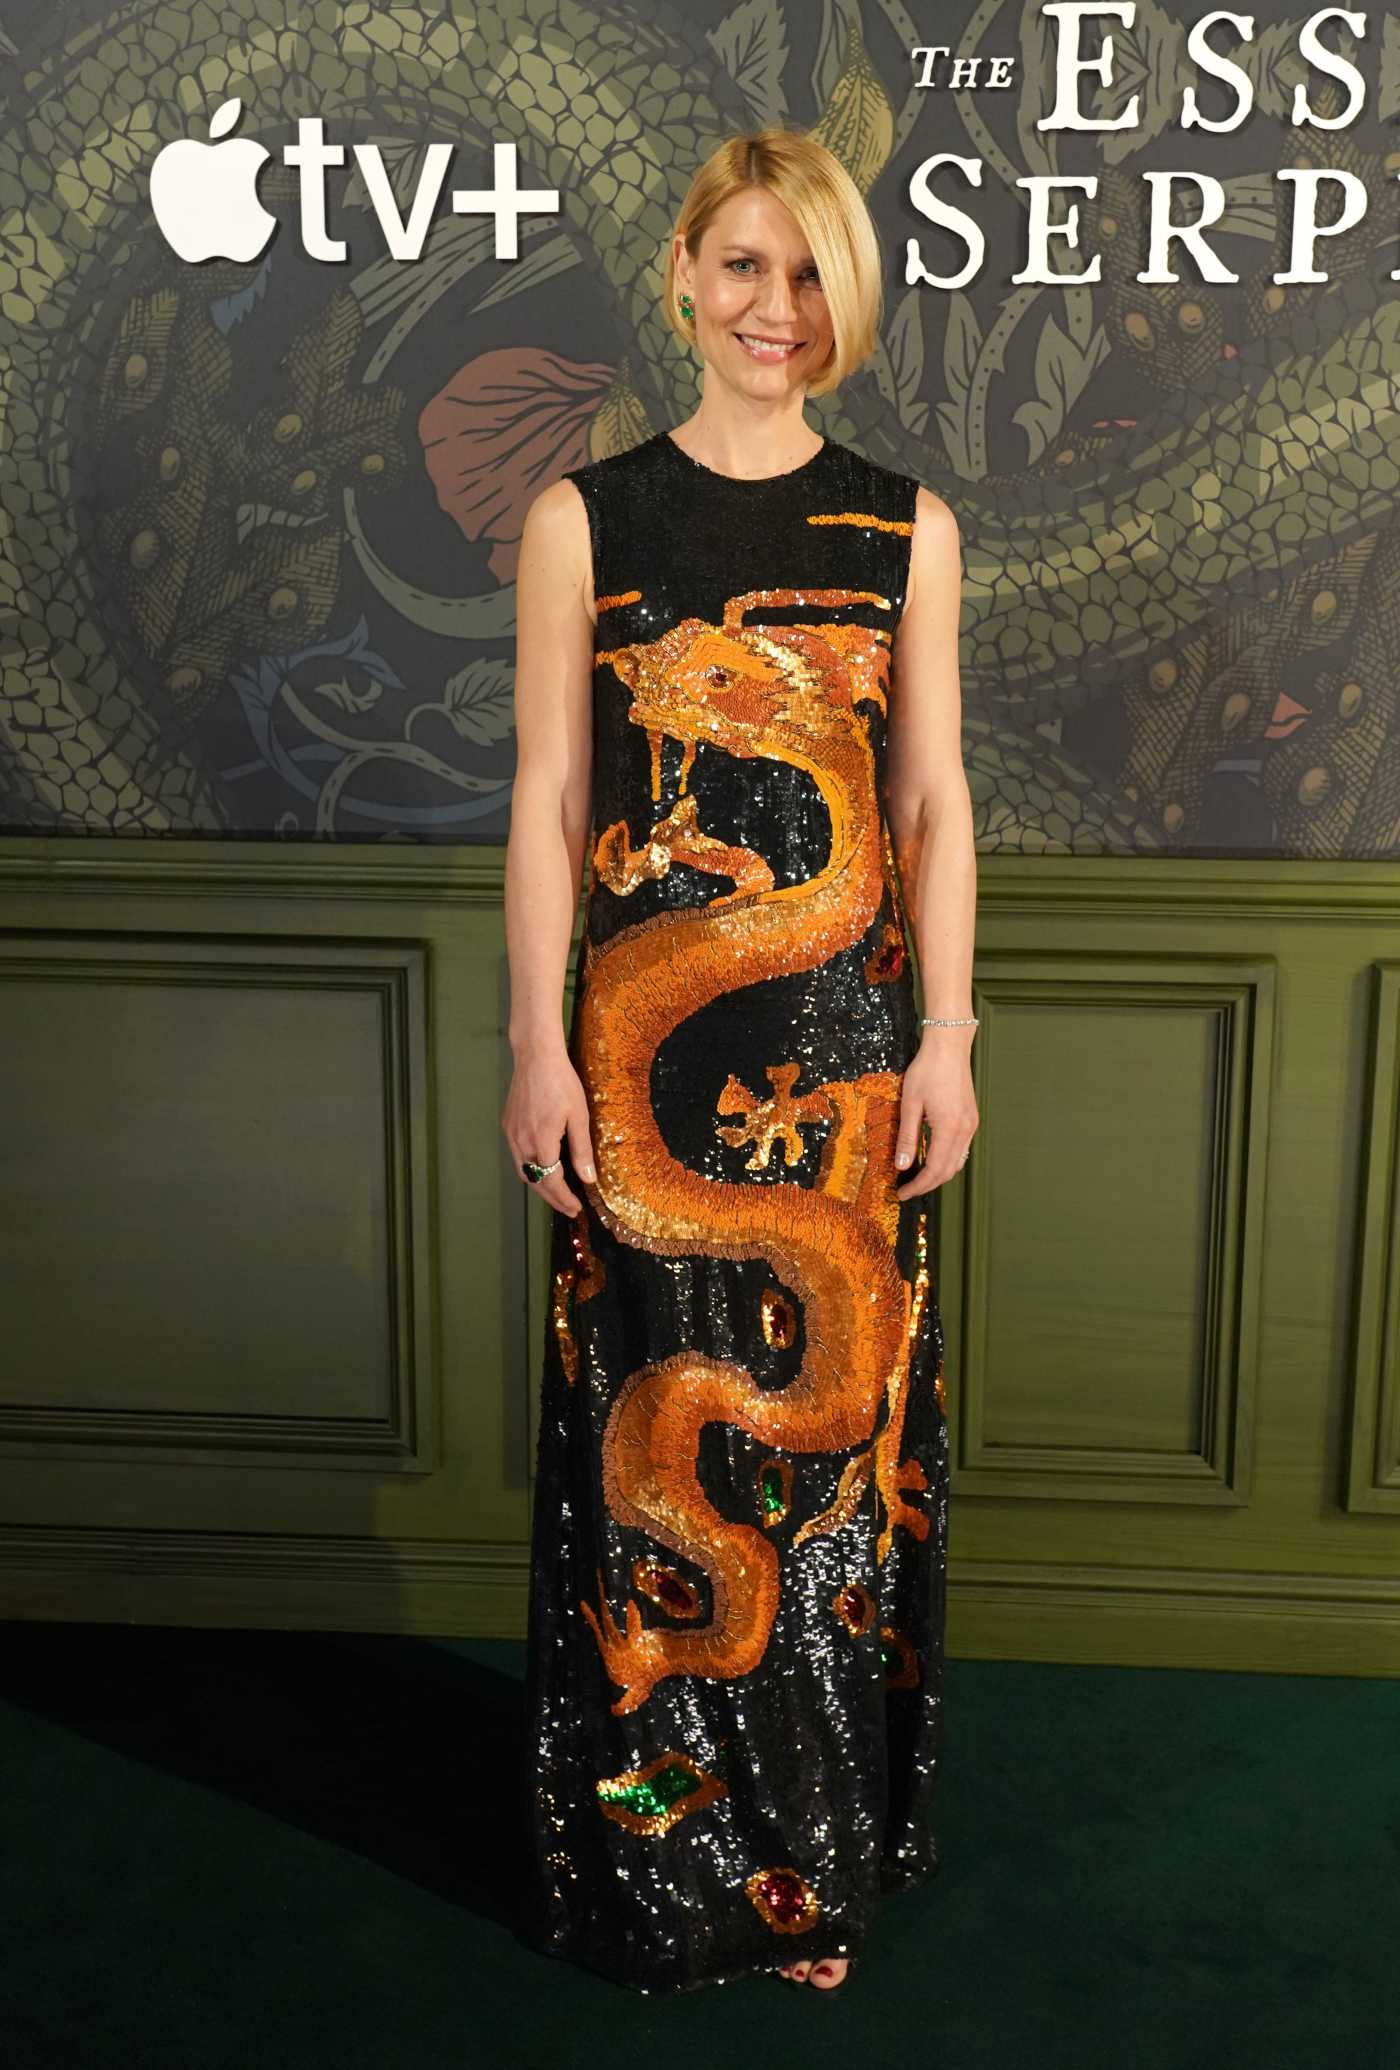 Claire Danes Attends The Essex Serpent Premiere in London 04/24/2022